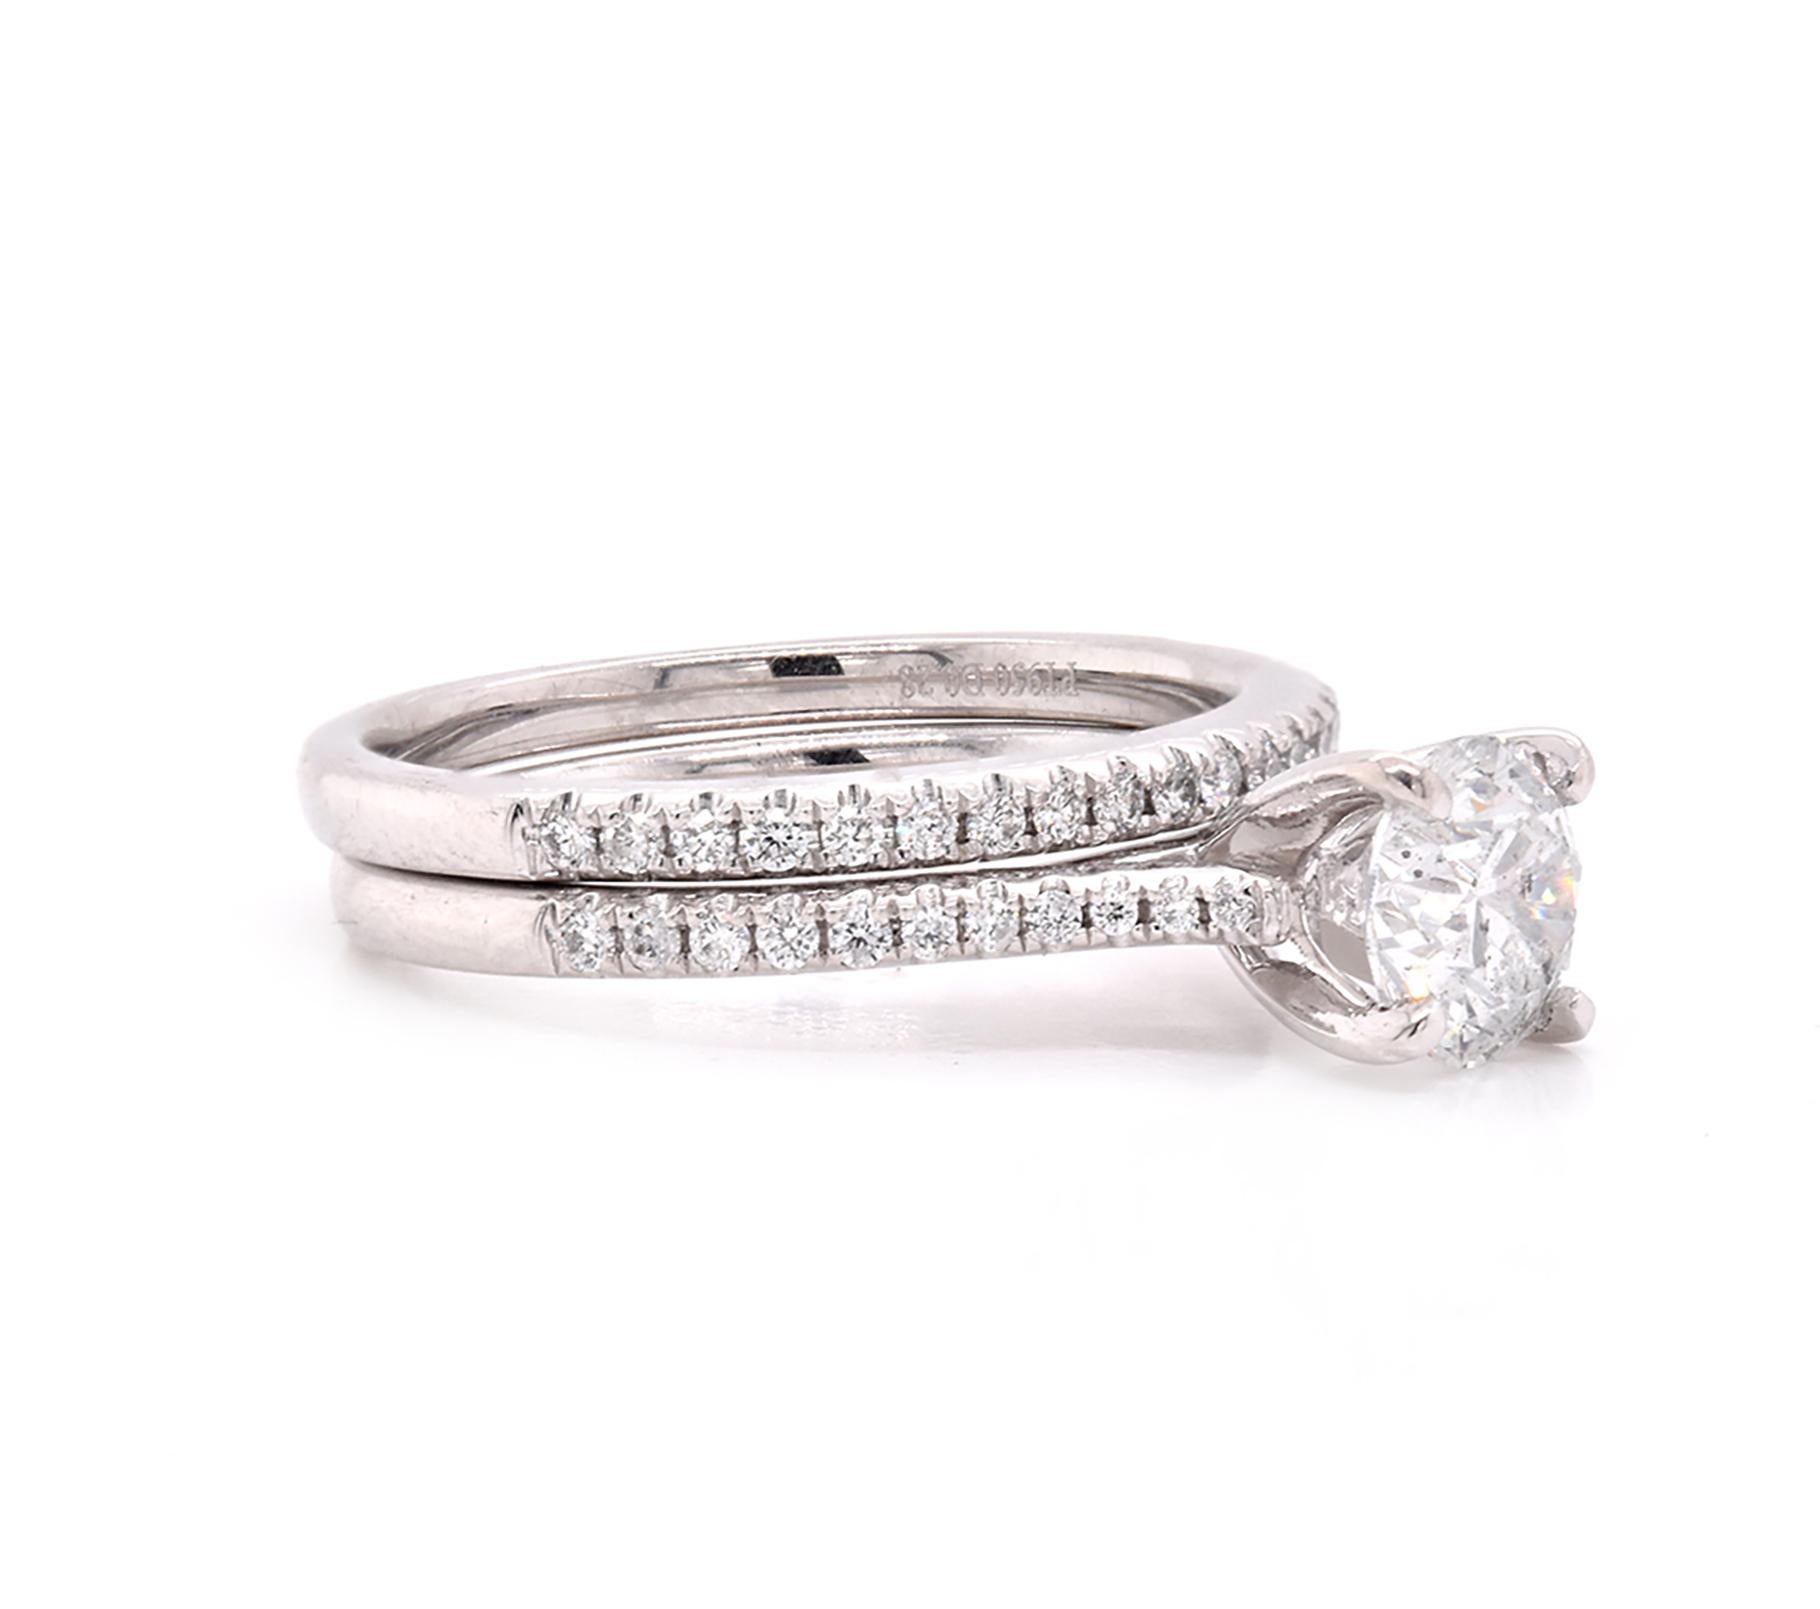 Material: platinum
Center Diamond: 1 round brilliant cut = 1.02ct
Color: G
Clarity: I1
Diamonds: 43 round cut = .65cttw
Color: G
Clarity: VS
Ring Size: 7 (please allow up to 2 additional business days for sizing requests)
Dimensions: ring shank